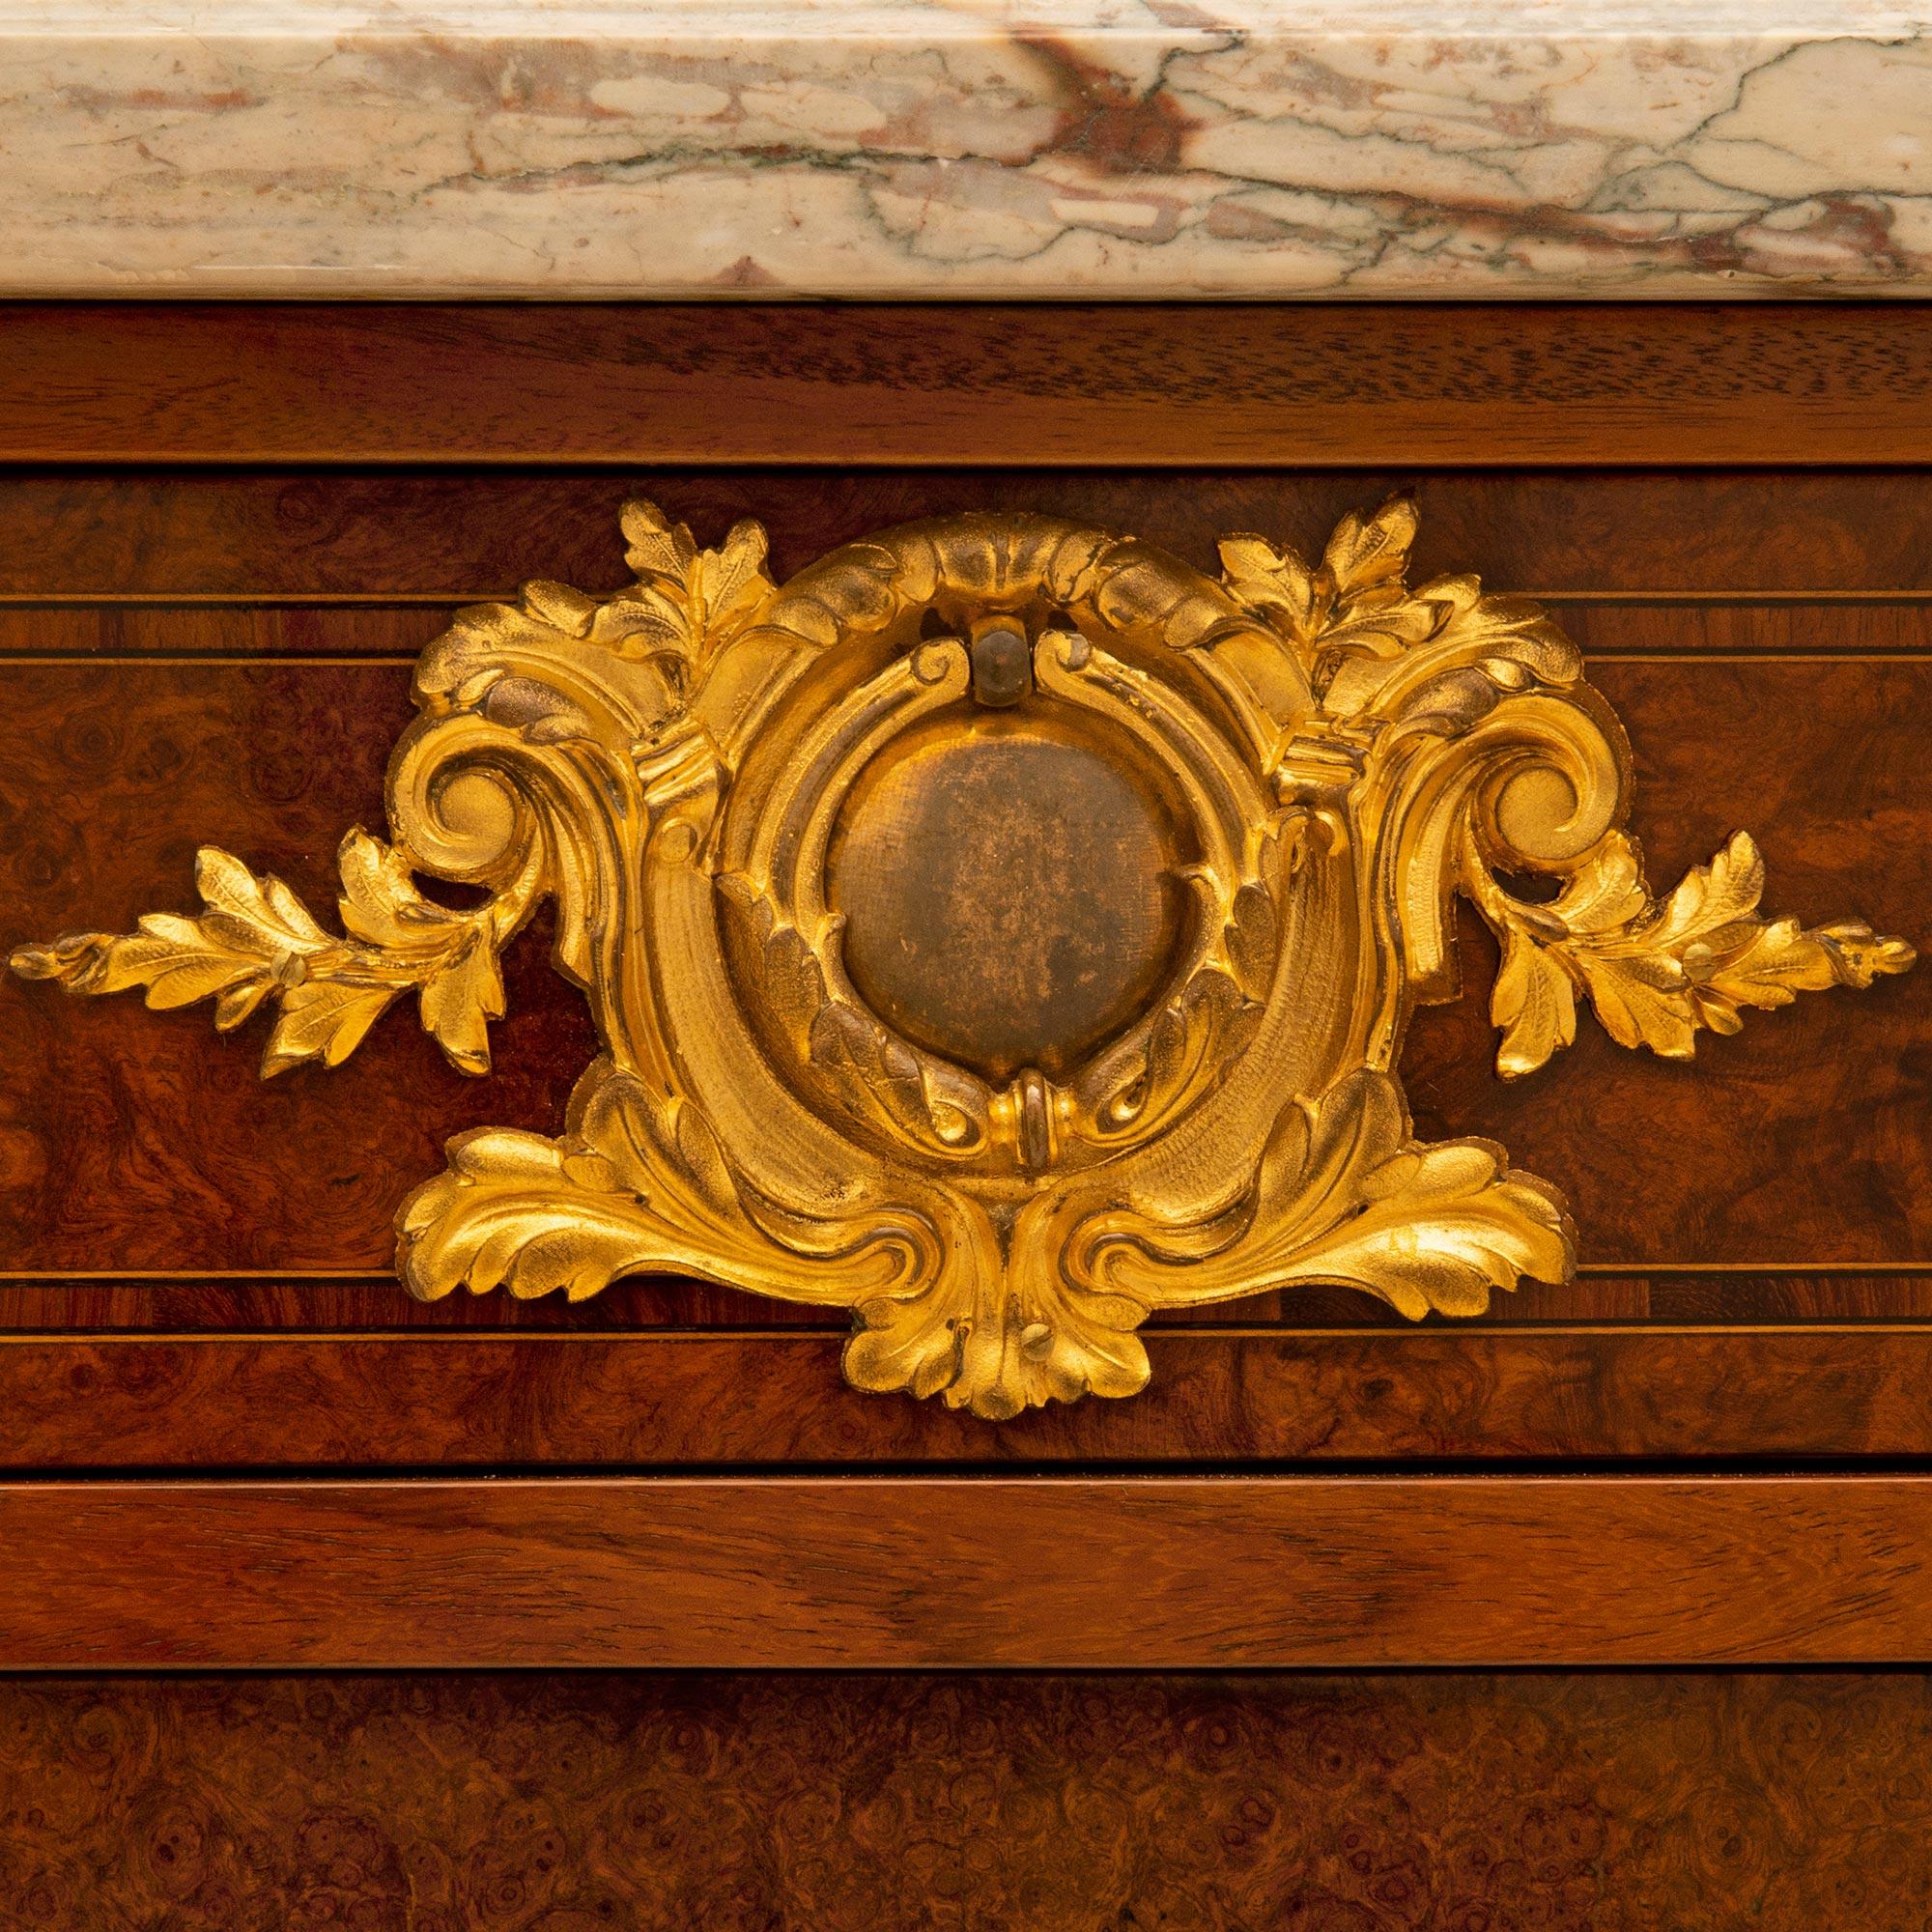 French 19th Century Empire Neoclassical Style Burl Walnut and Ormolu Buffet For Sale 5